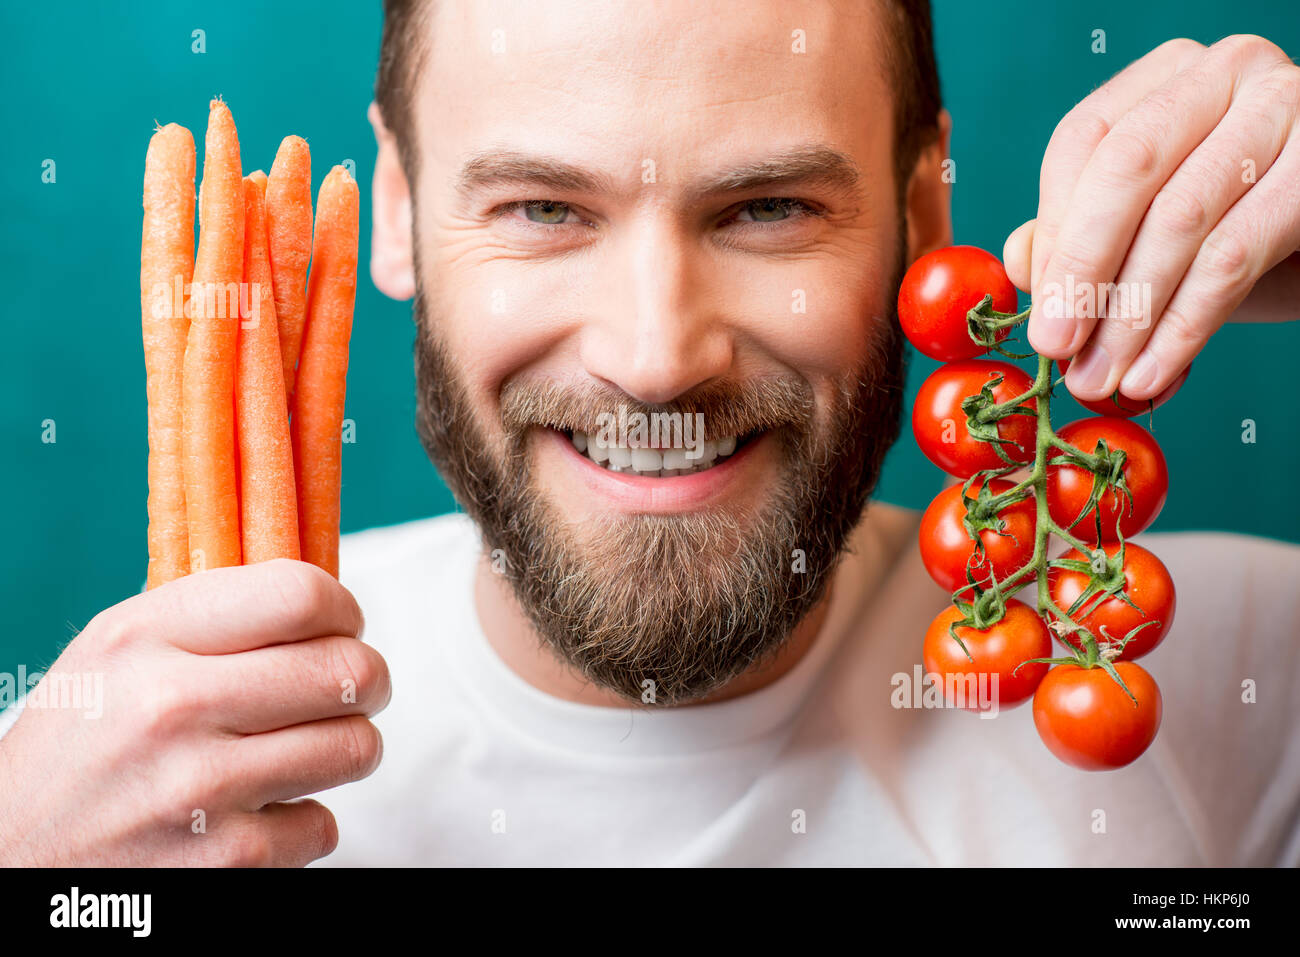 Man with healthy food Stock Photo